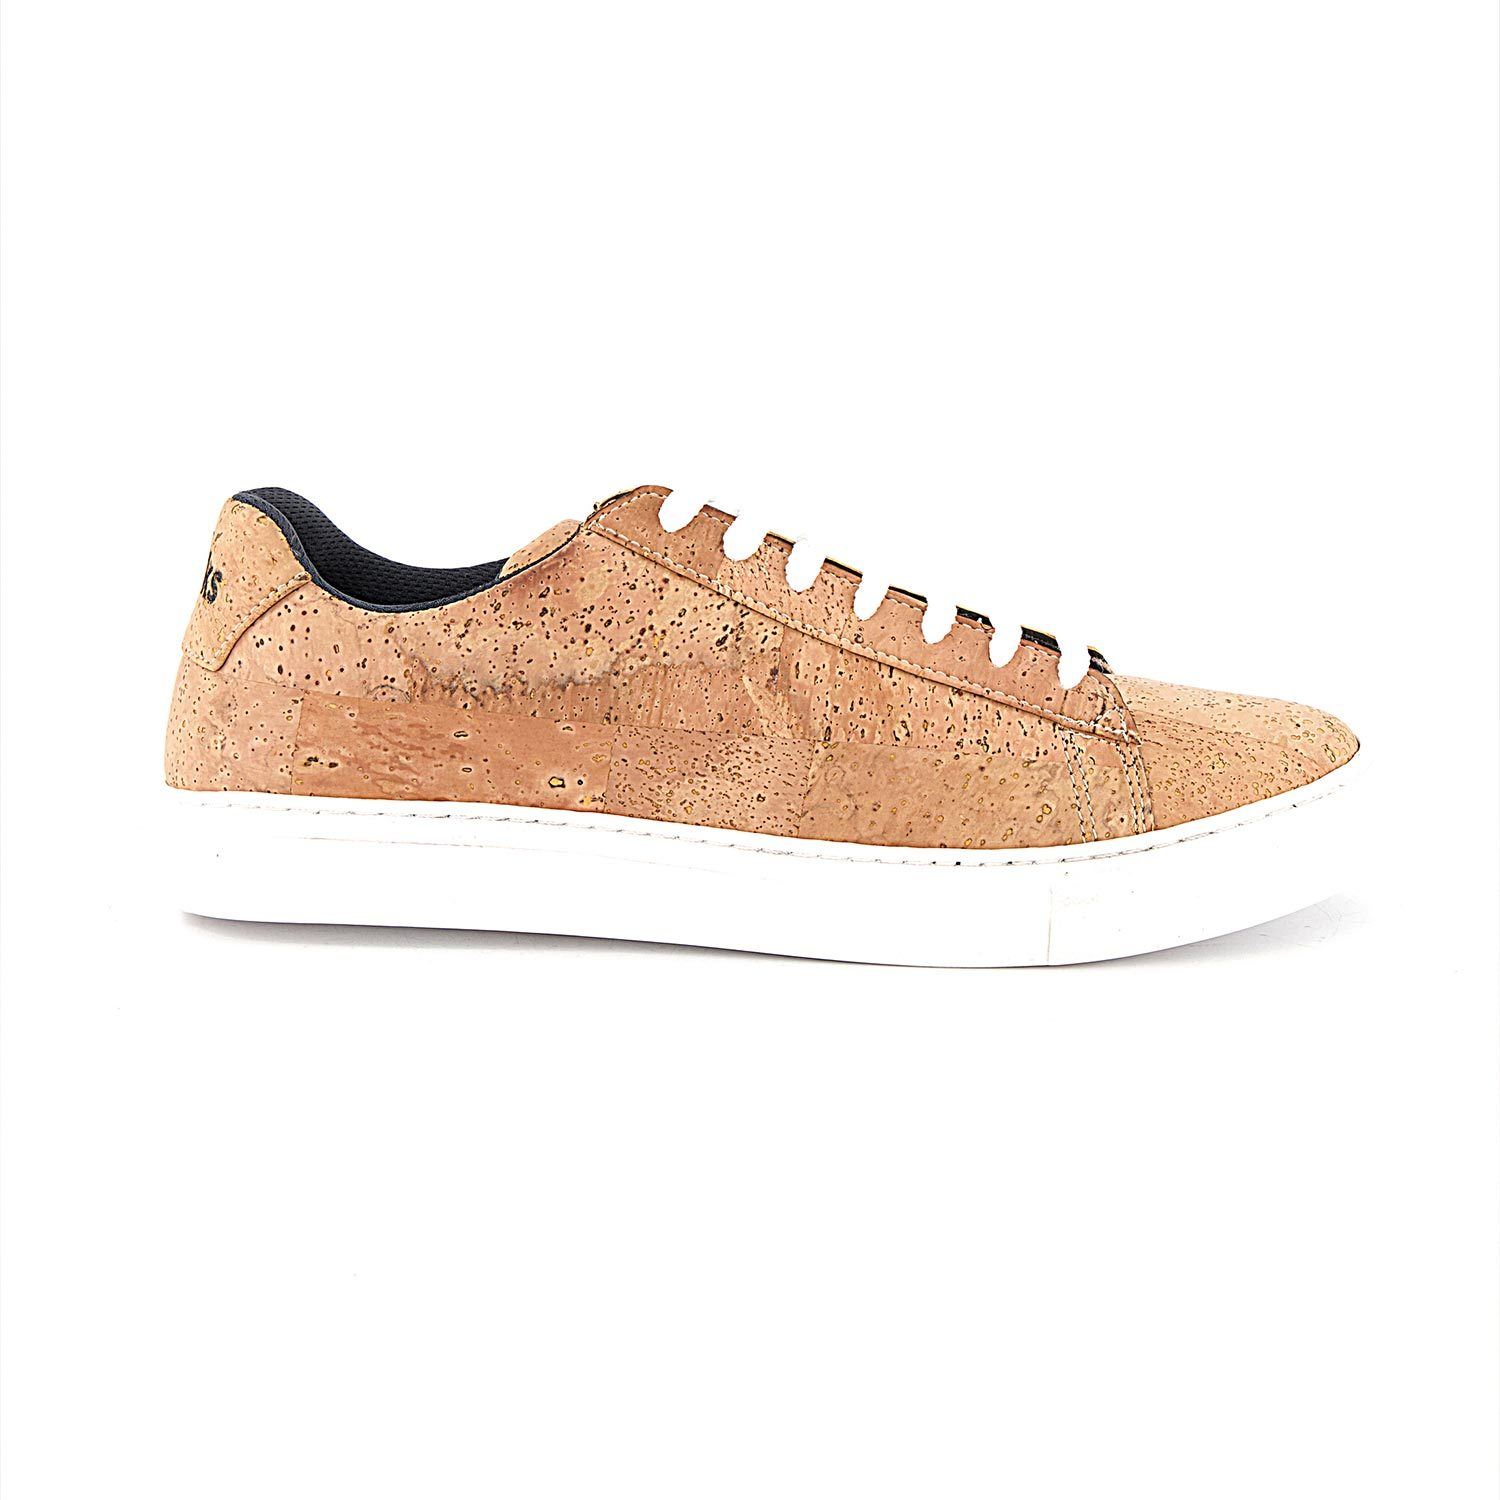 Reefer Natural Cork Sneakers clothing & accessories Reefer Shoes